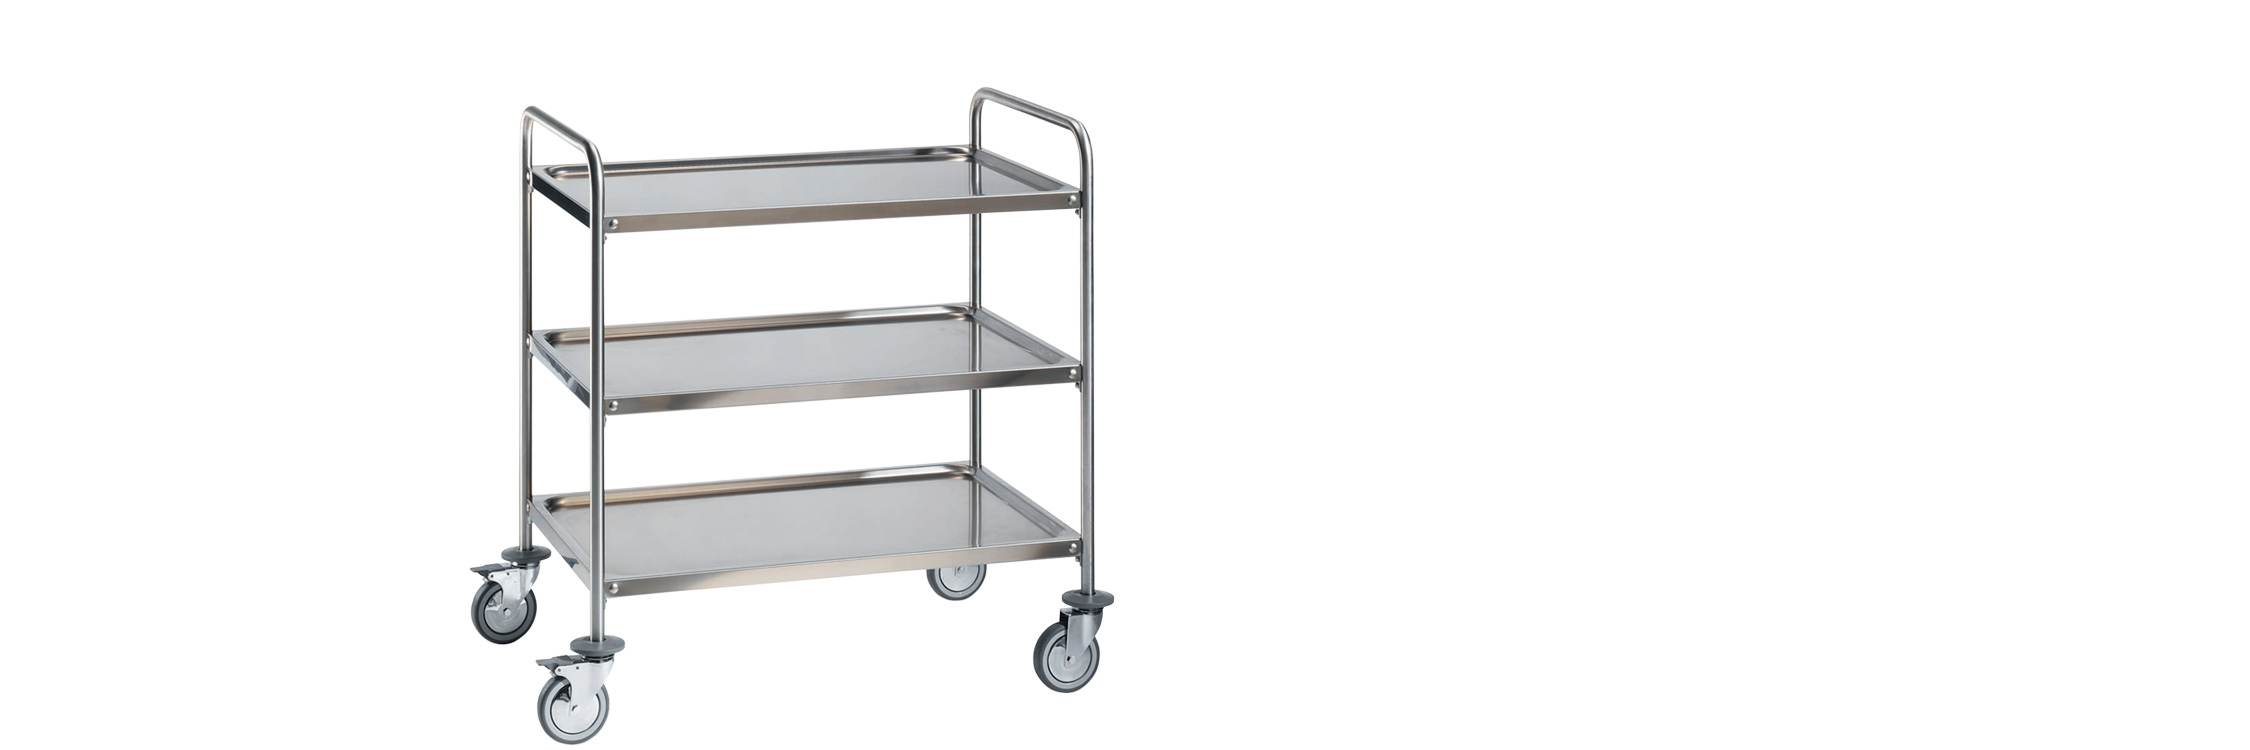 Stainless steel service trolleys for all kind of uses